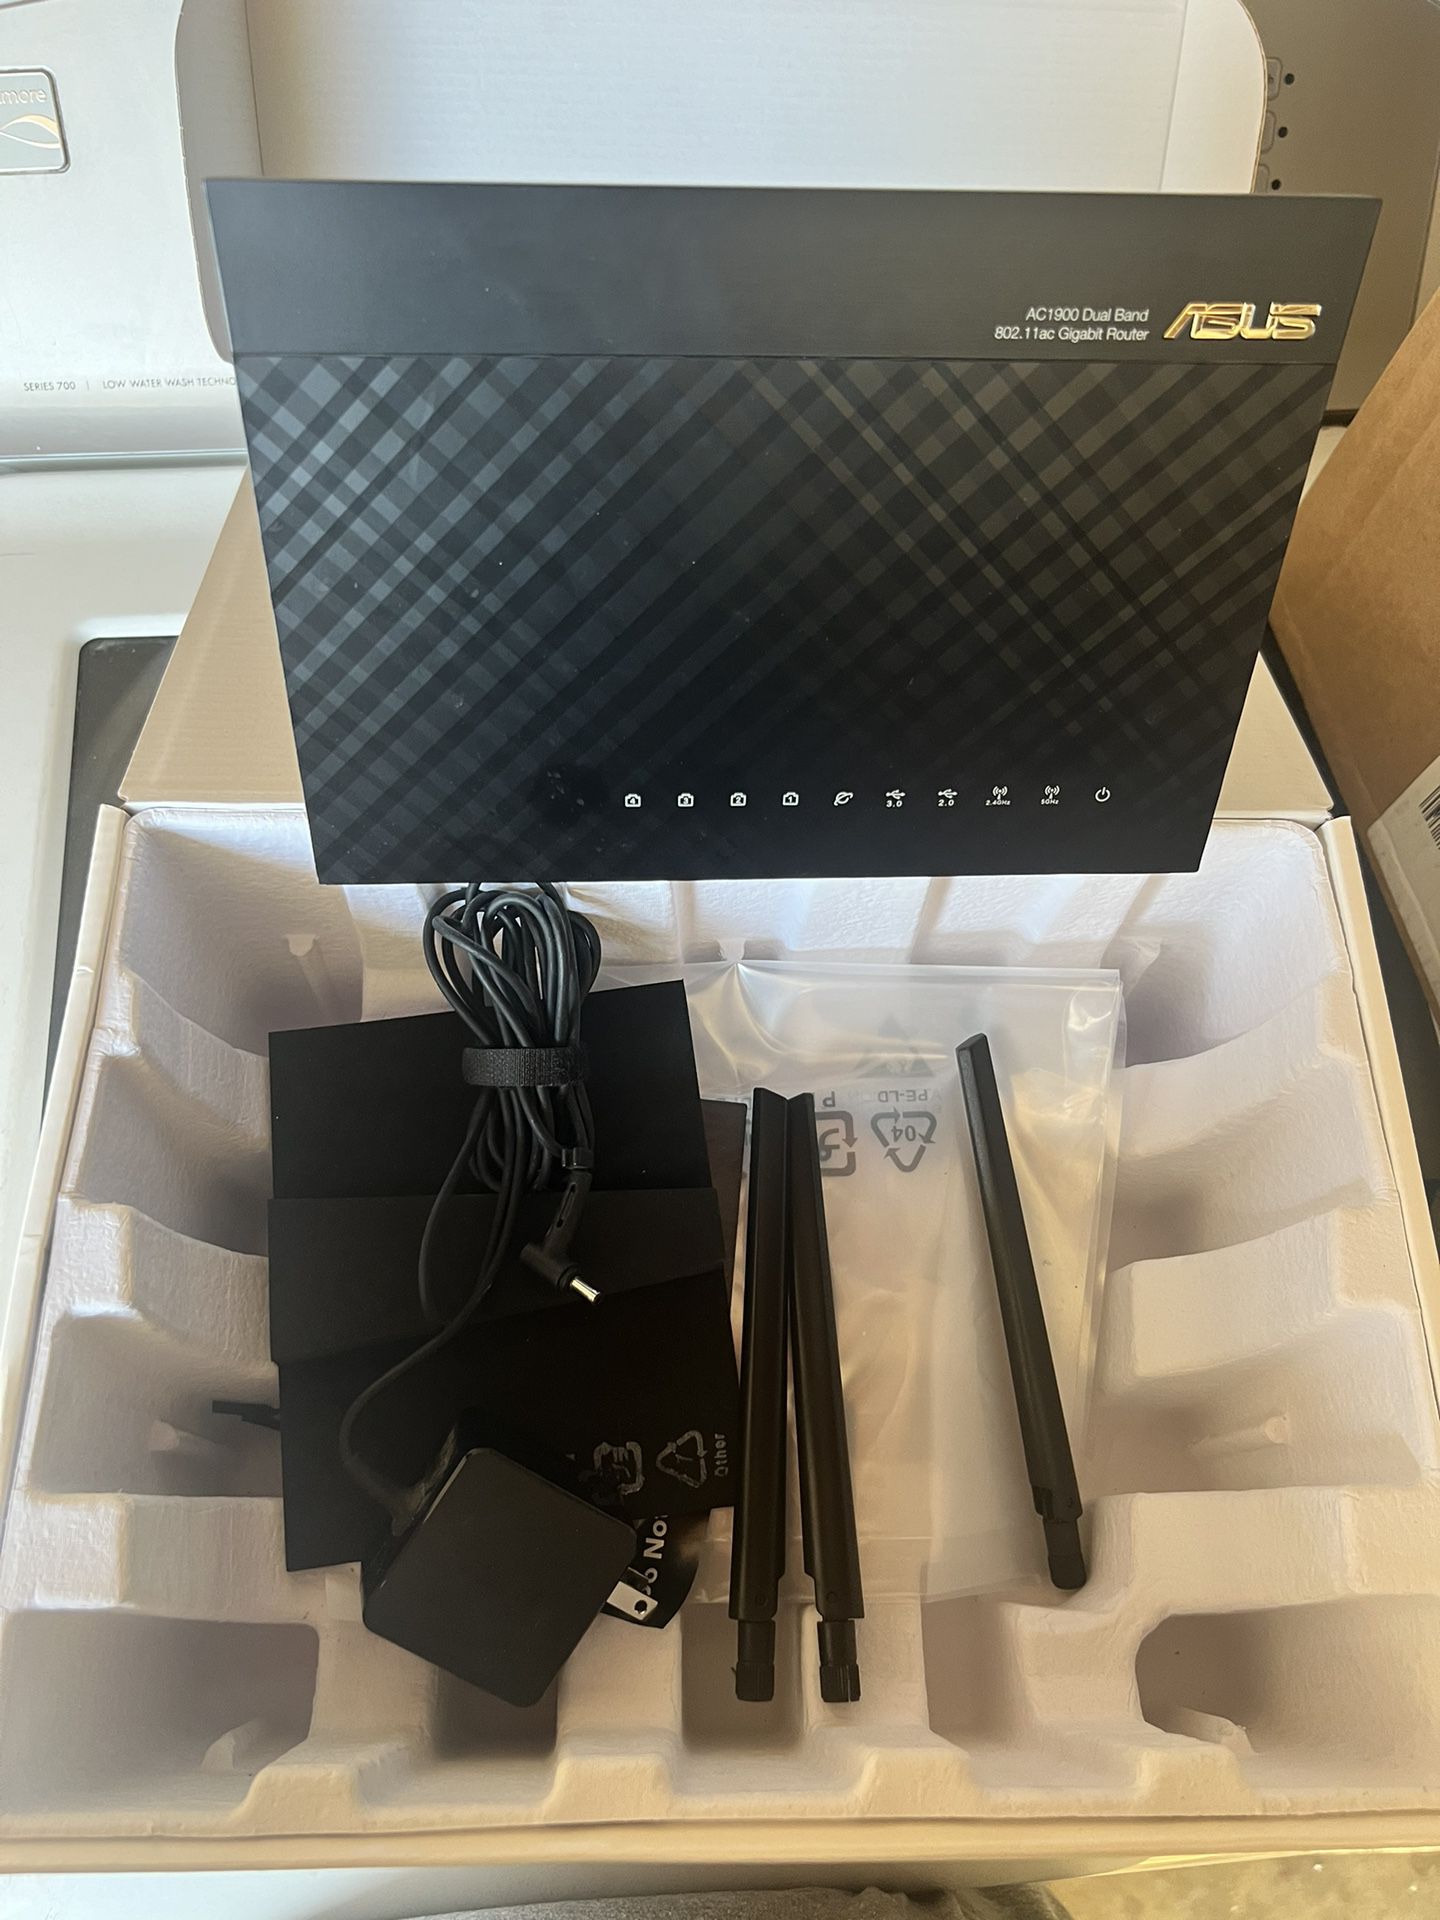 ASUS Wireless AC1900 Router (RT-AC68U)